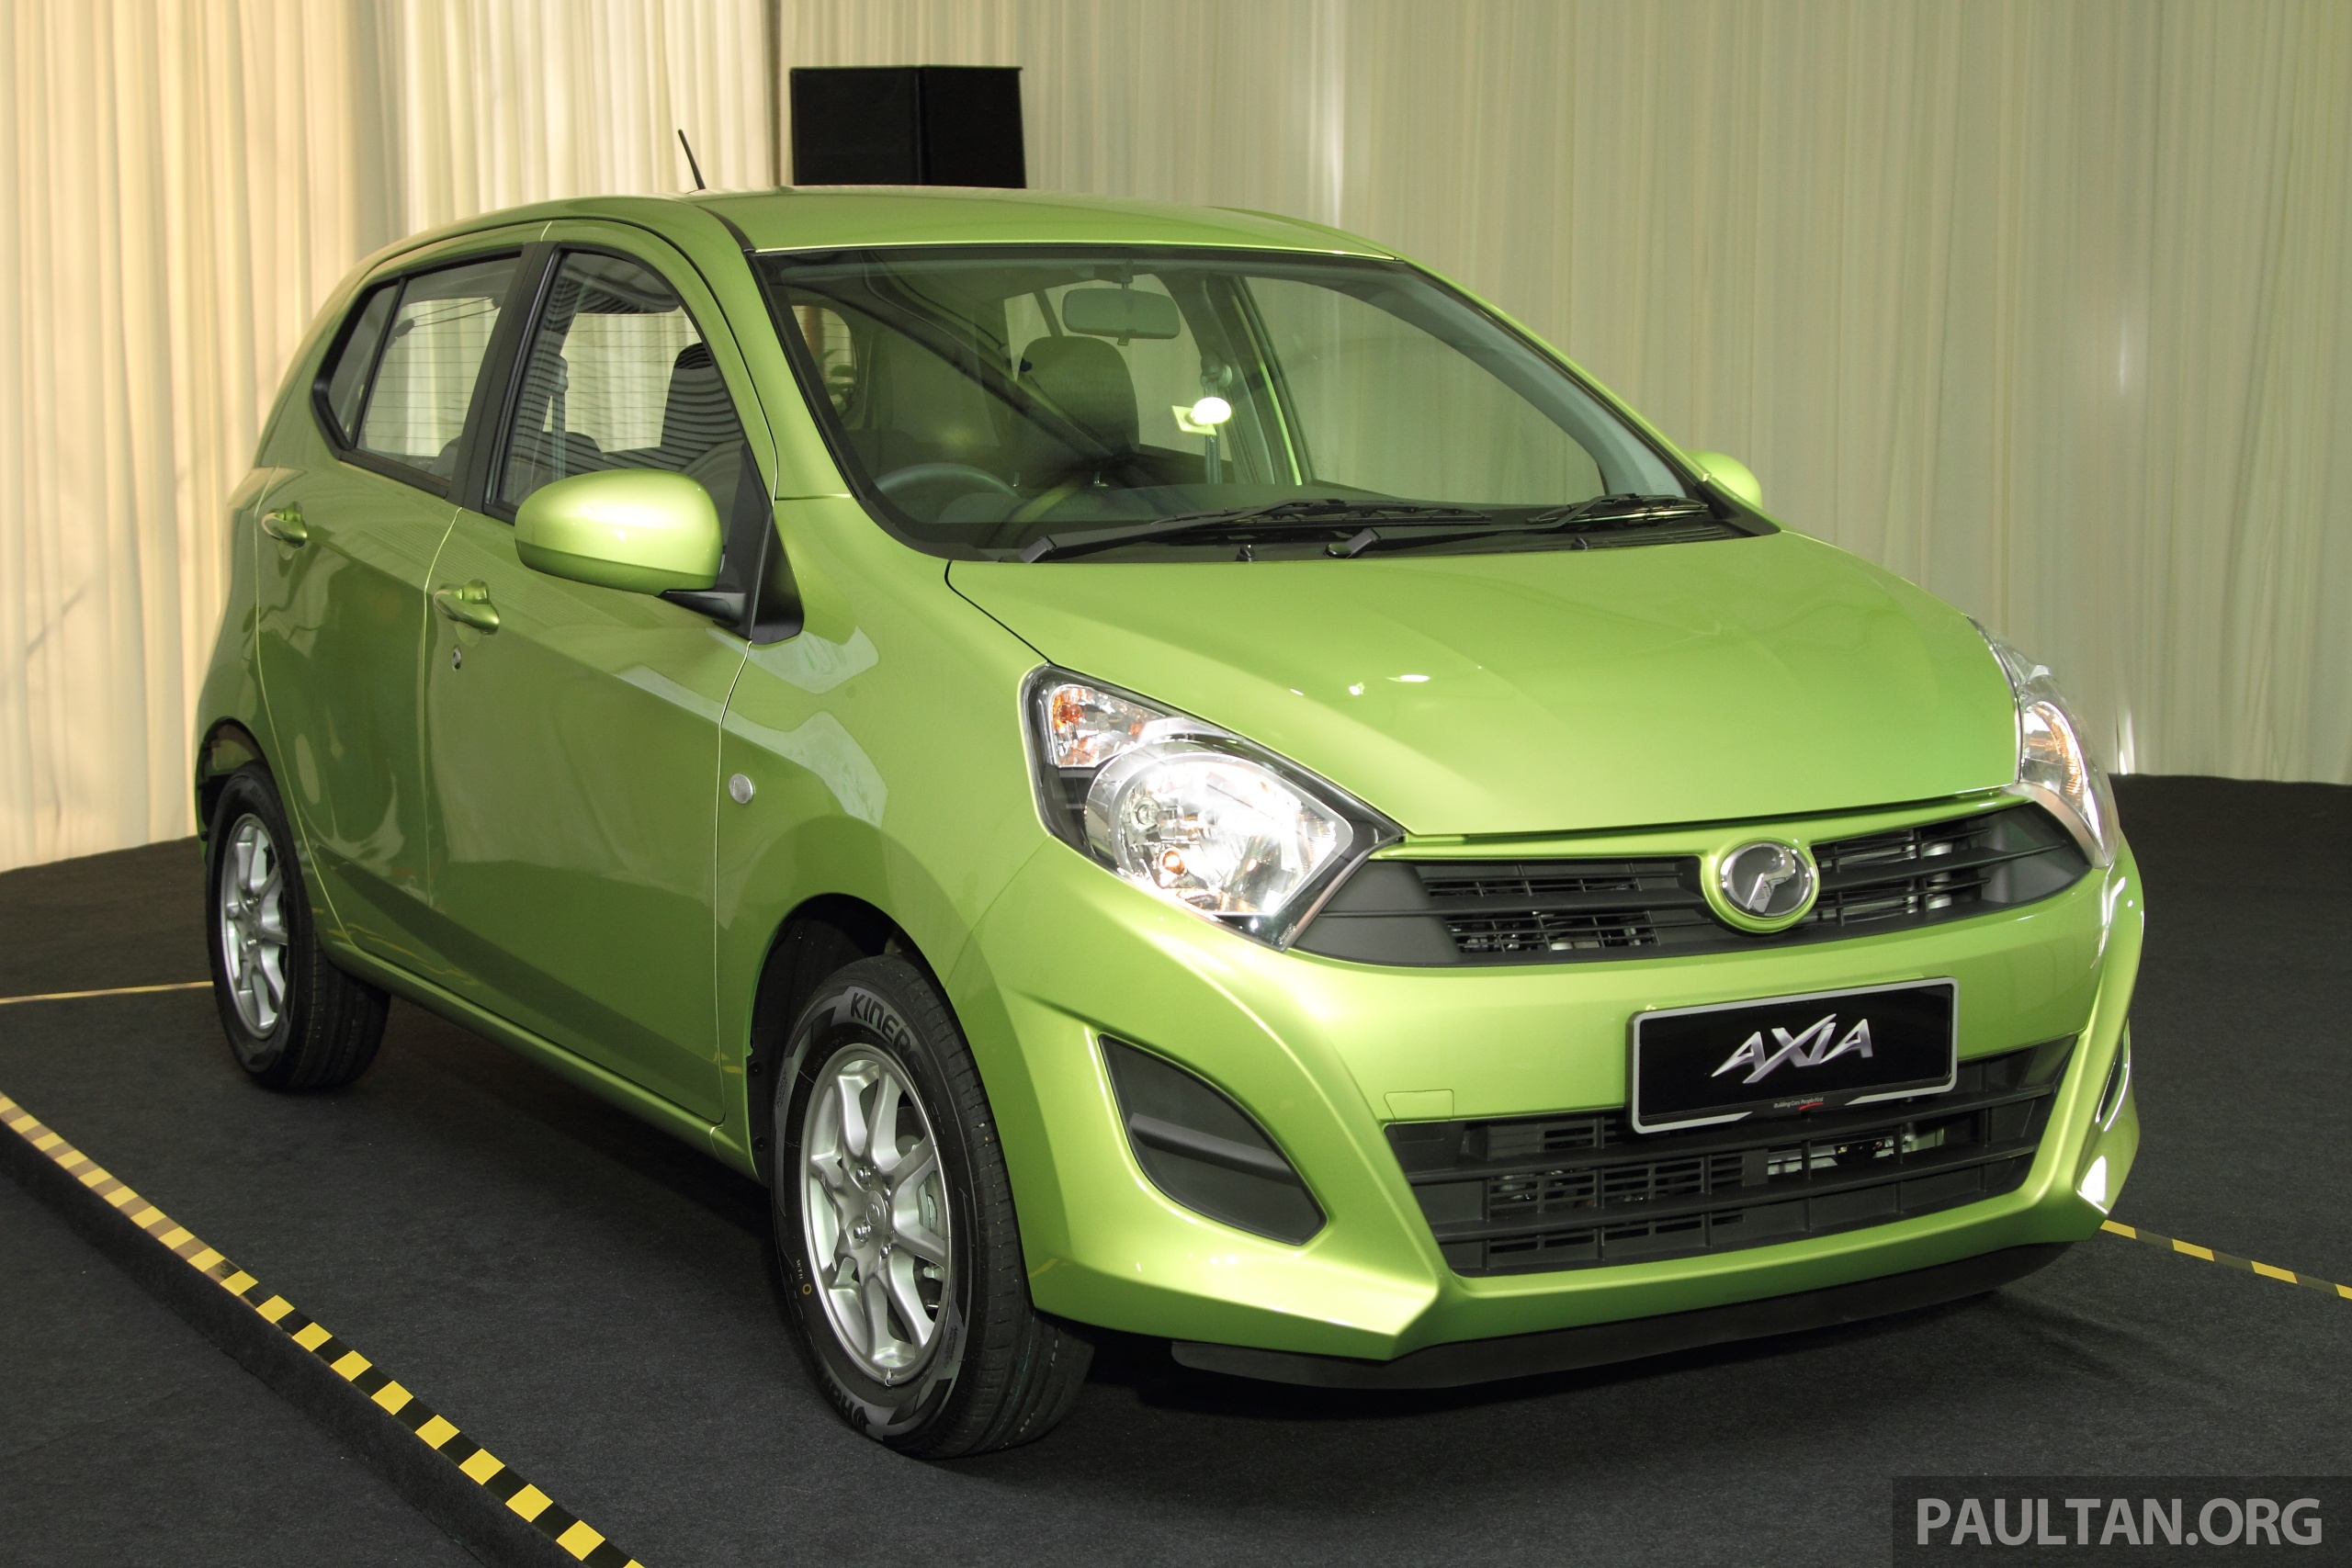 Perodua Axia 1.0 G - price raised by RM990 from Oct 1